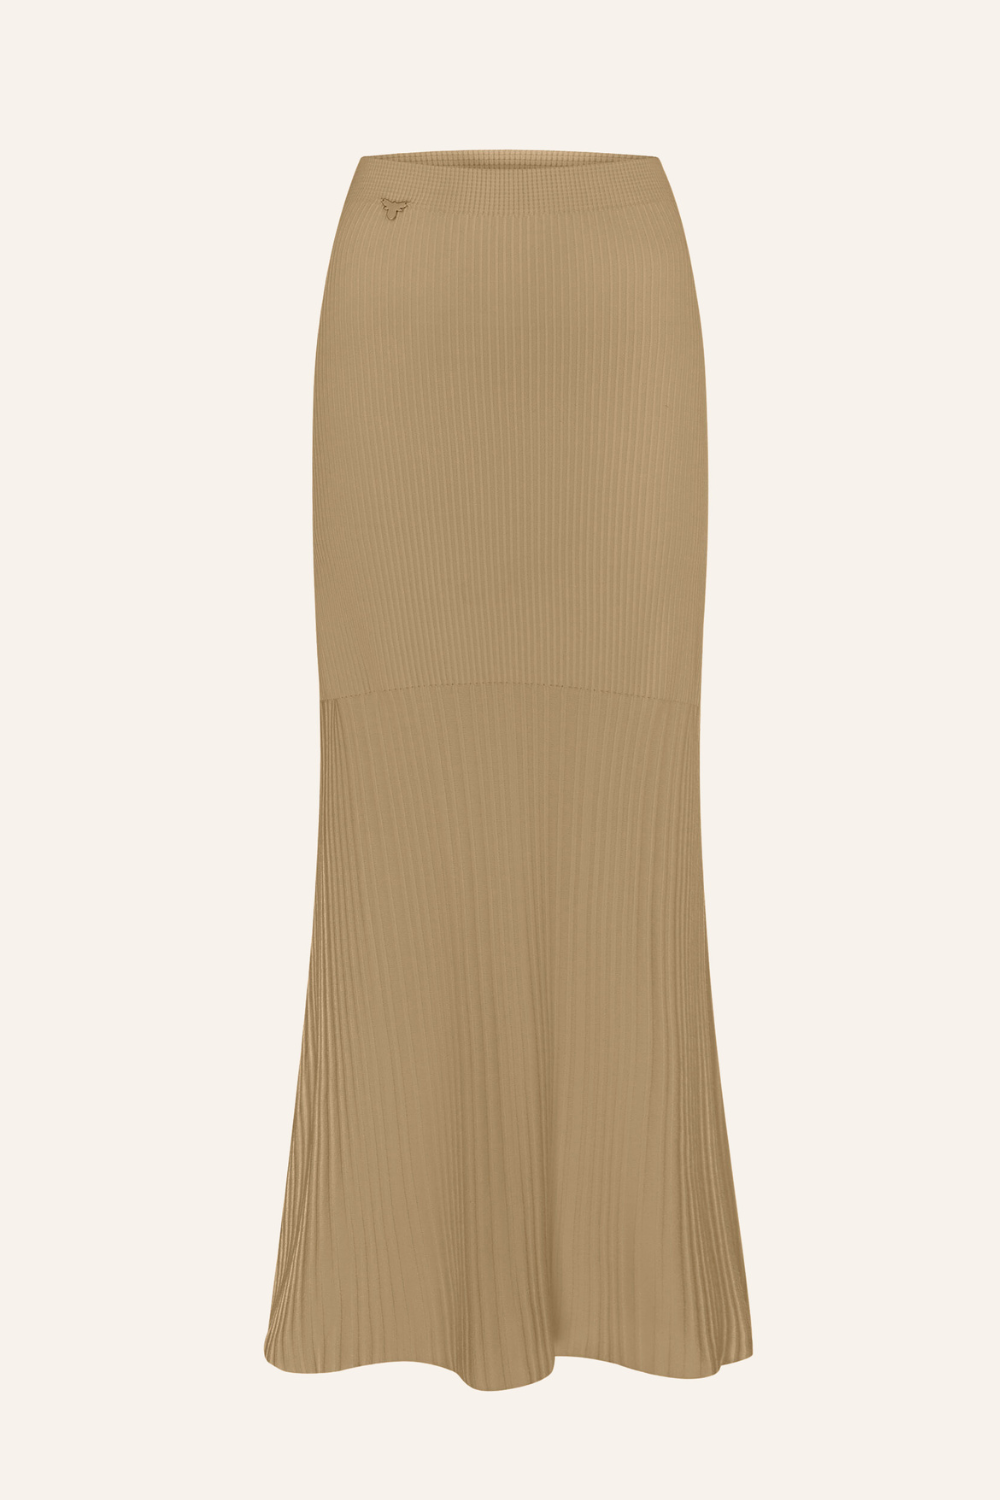 Knitted skirt, beige, (T.Mosca), UOL24-01